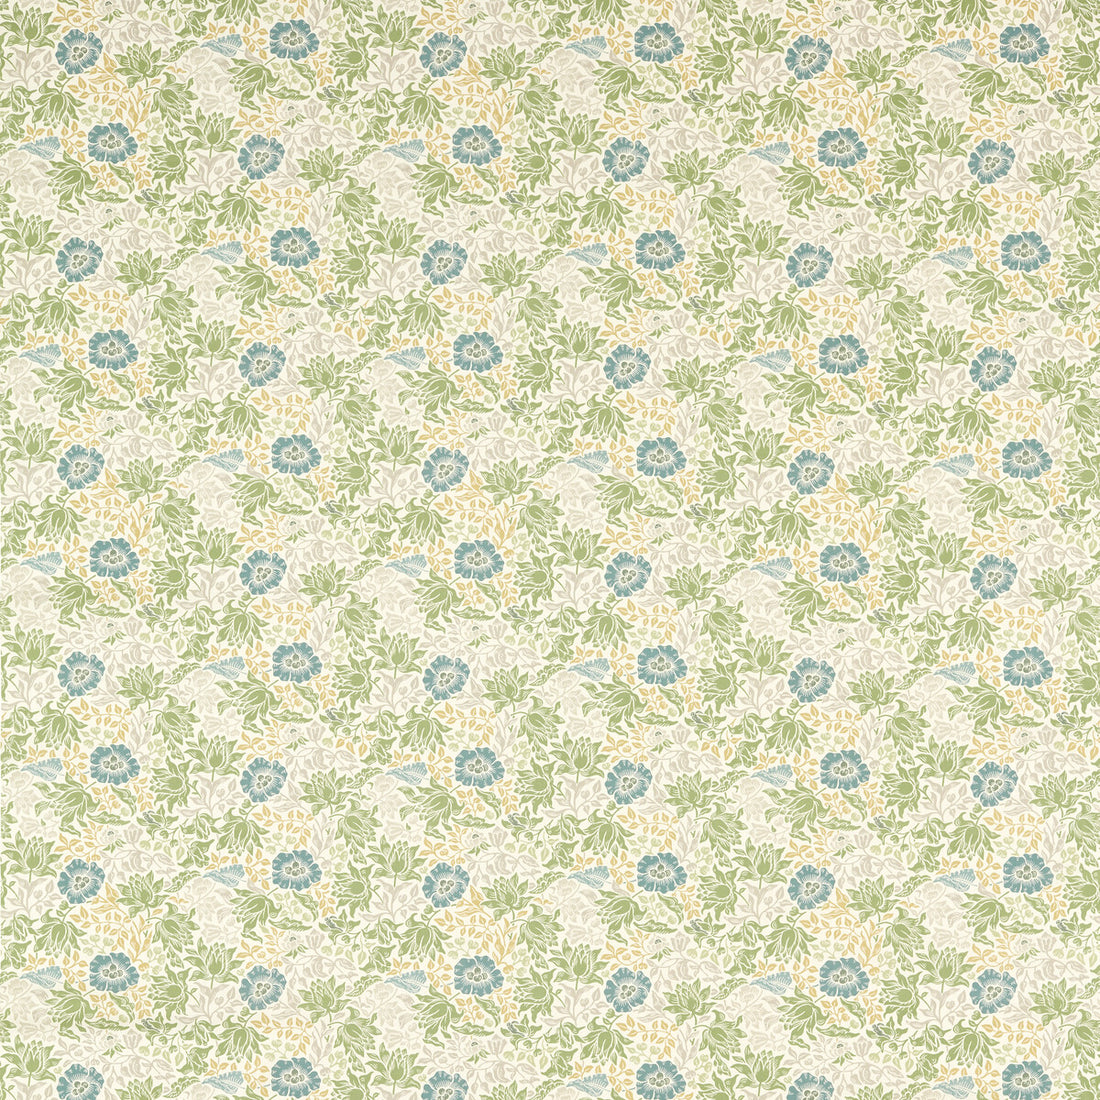 Mallow fabric in apple/linen color - pattern F1680/02.CAC.0 - by Clarke And Clarke in the Clarke &amp; Clarke William Morris Designs collection